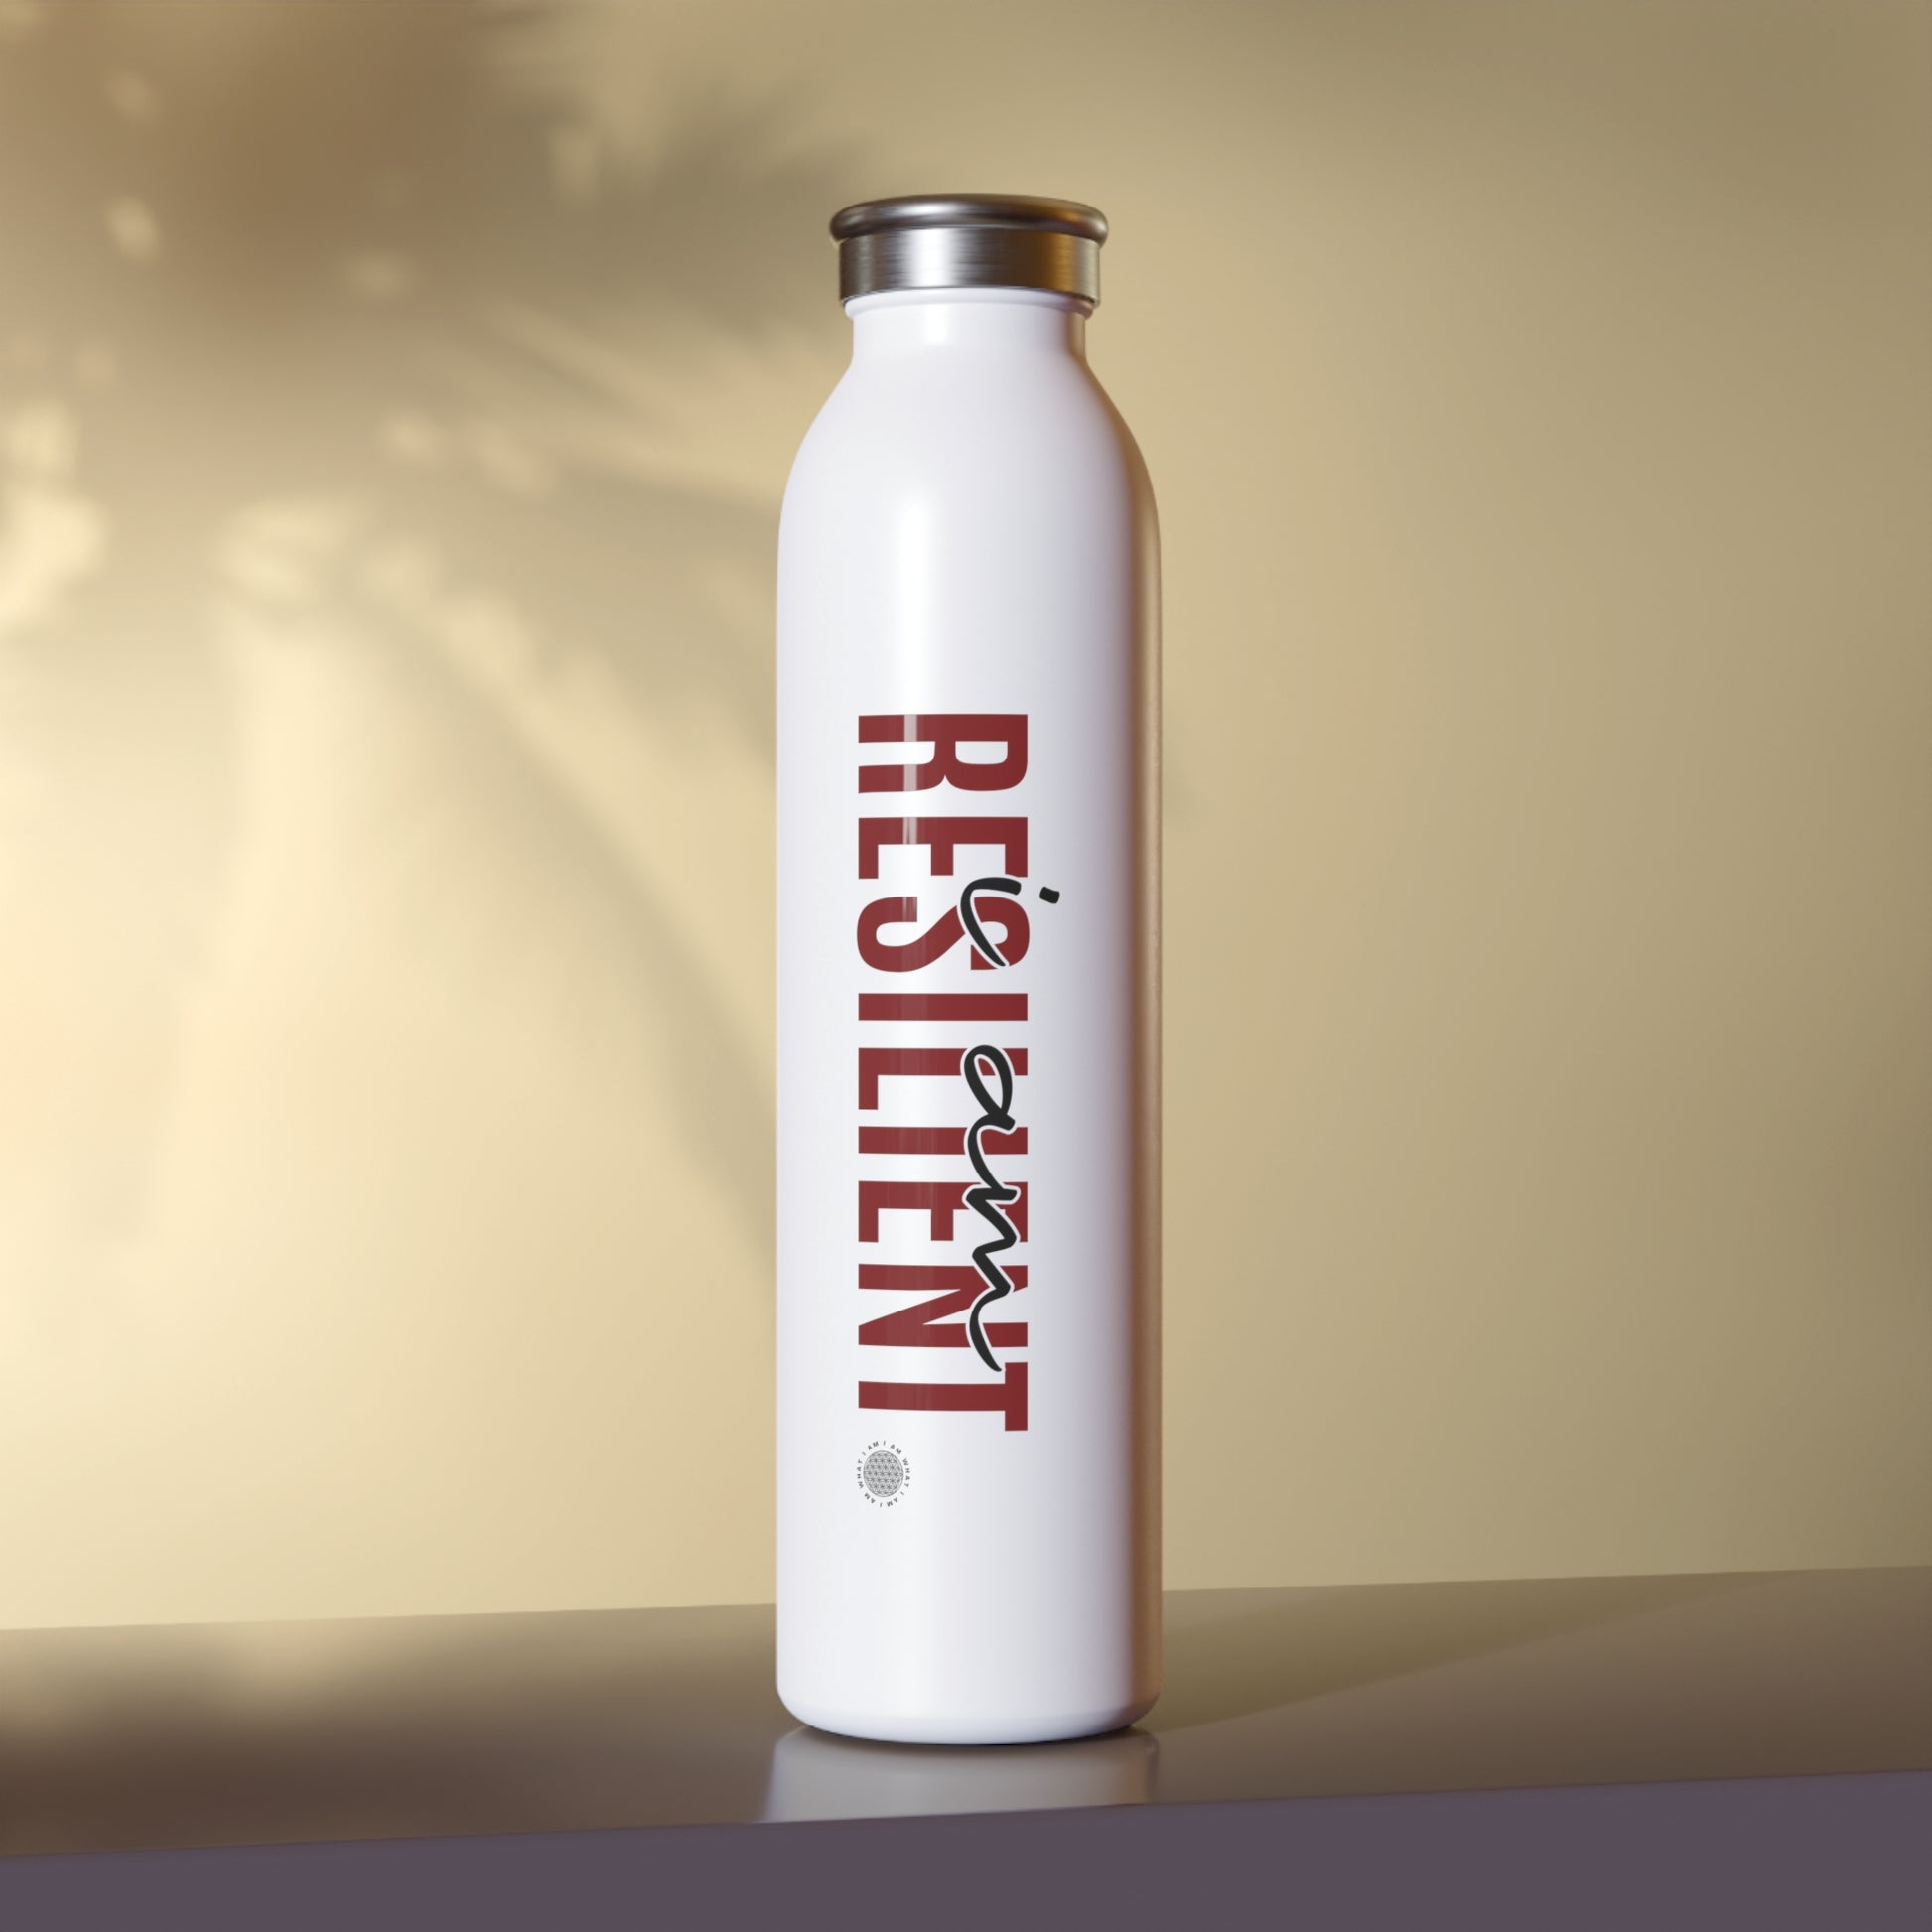 Our I Am Resilient affirmation water bottle is one of our positive affirmations for mental health. Positive thinking keeps our mindset happy and healthy. This personalized water bottle was designed to become a creator’s favorite canvas of expression.